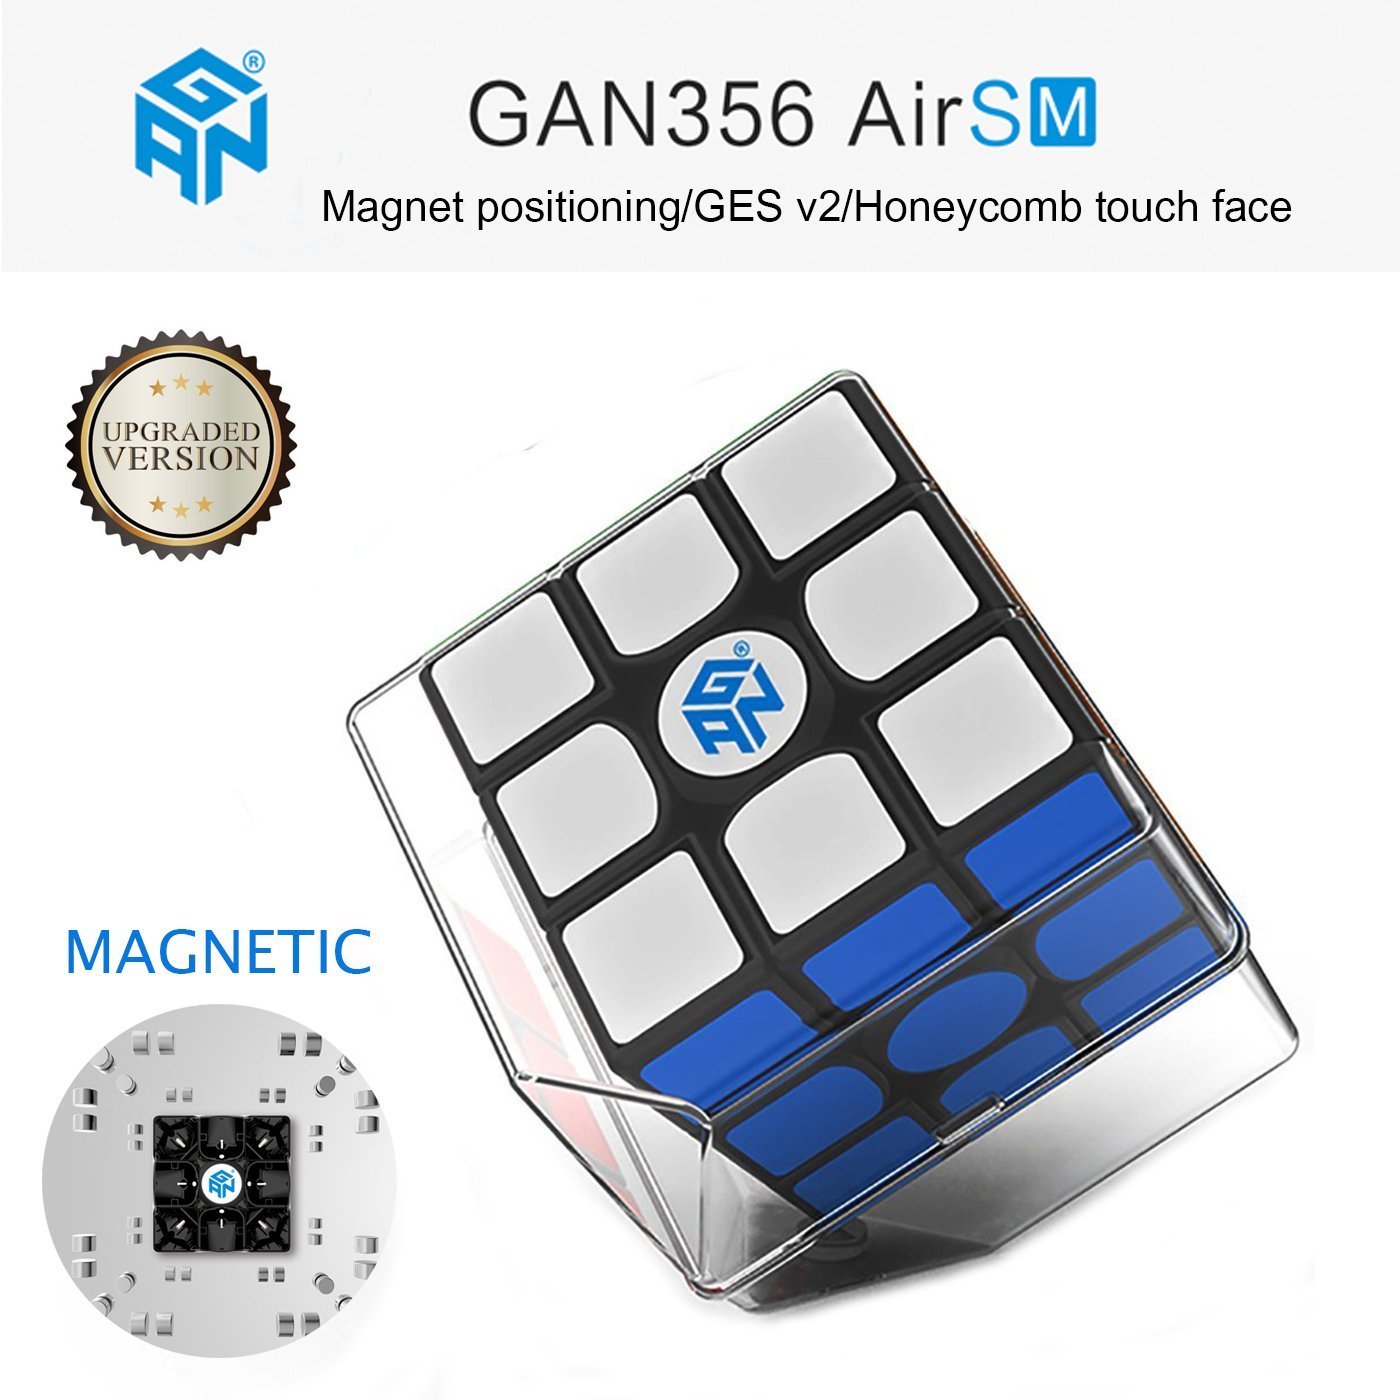 Gan 356 Air Pro Honey Comb contact surface 3x3x3 Speed Competition Magic Cube